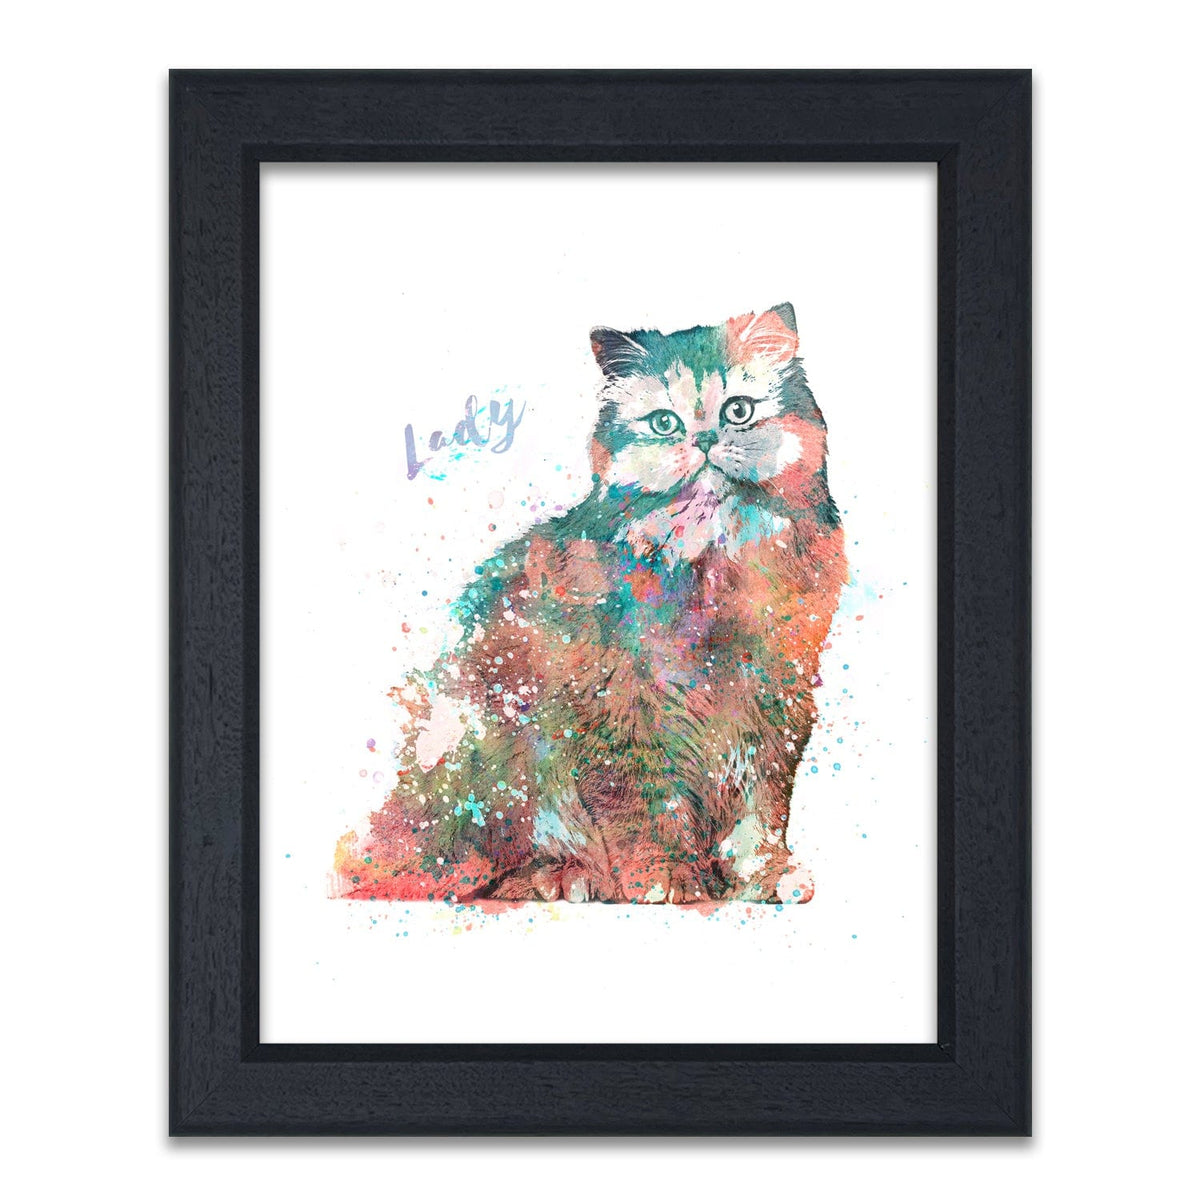 Framed Persian Cat Art Decor from Personal Prints